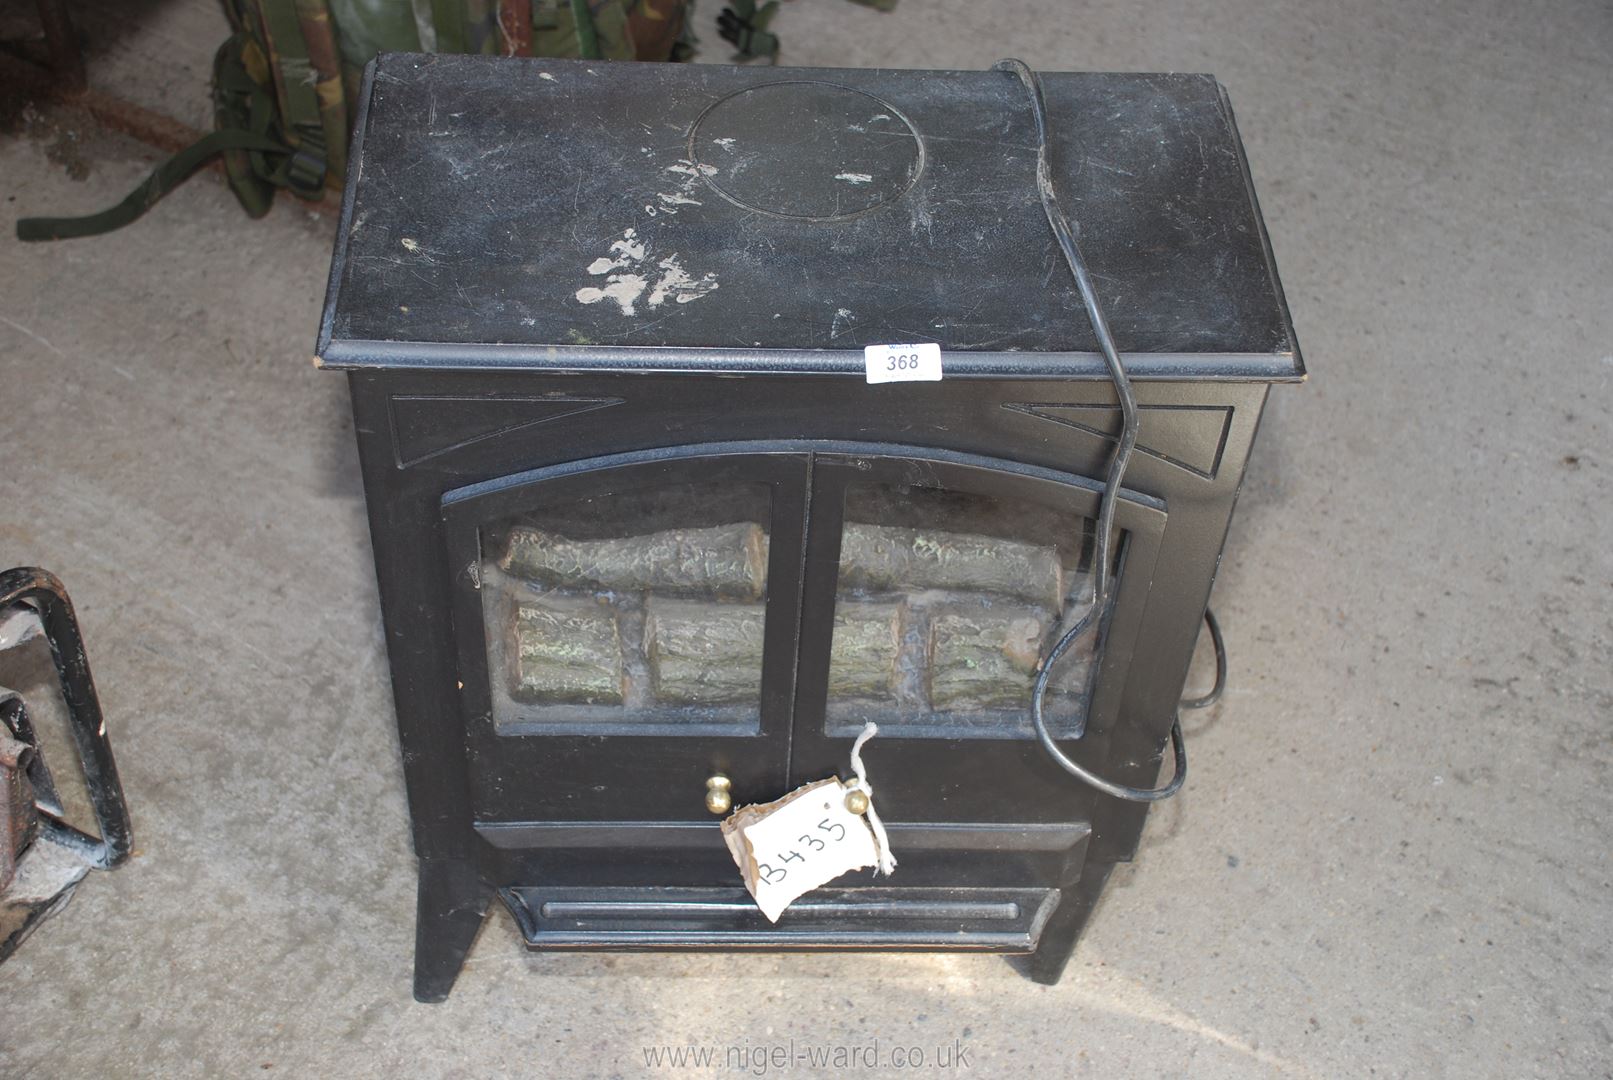 An electric log effect stove a/f.